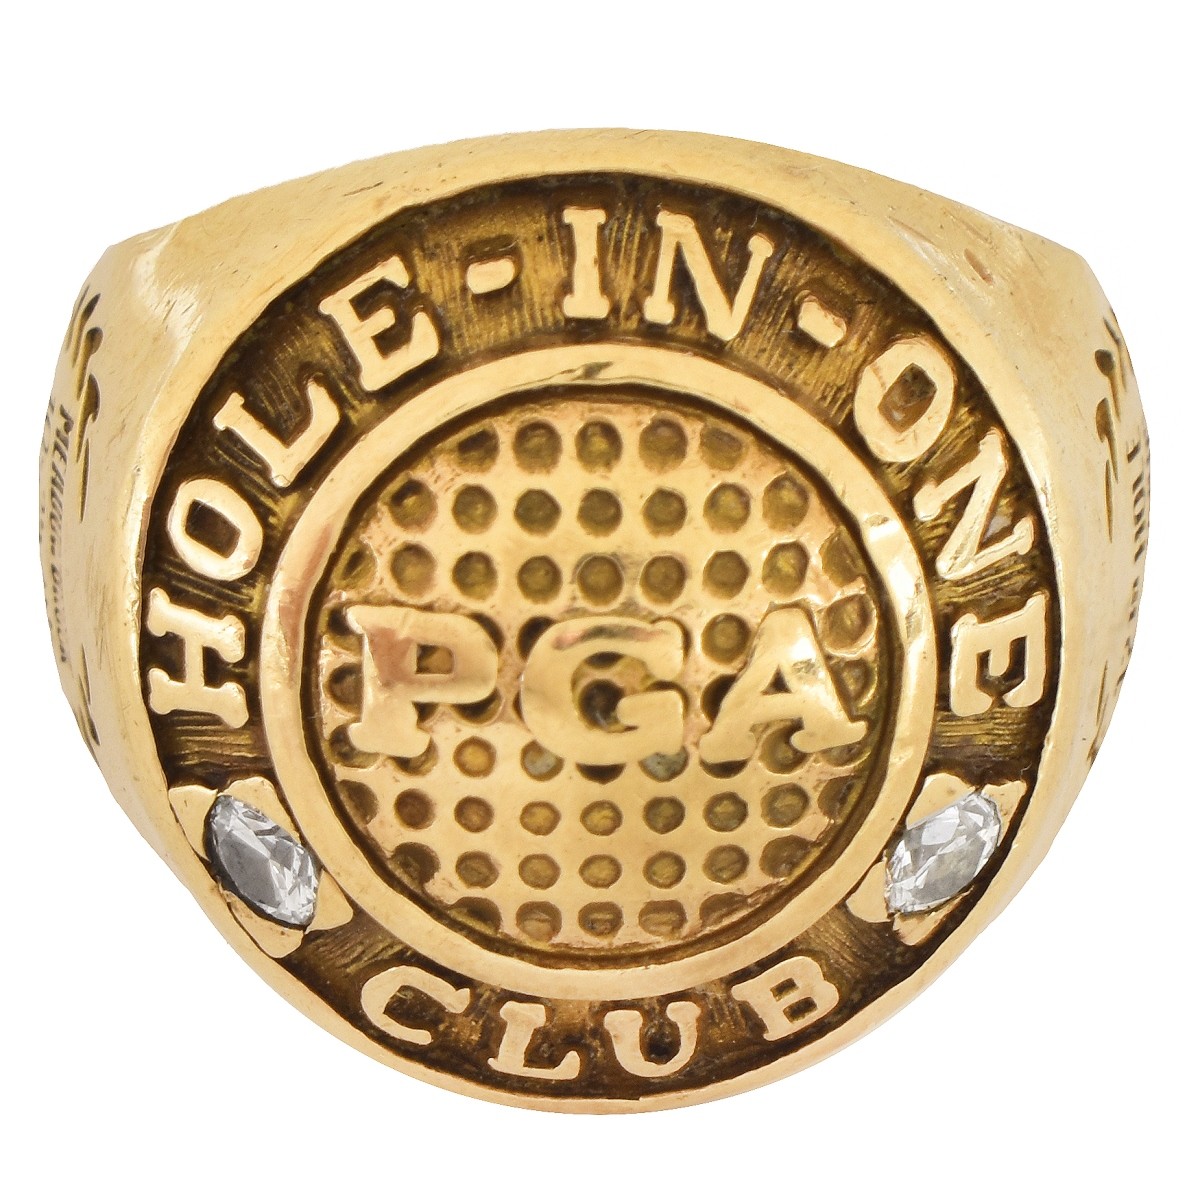 Vintage 10K Gold Hole in One Ring